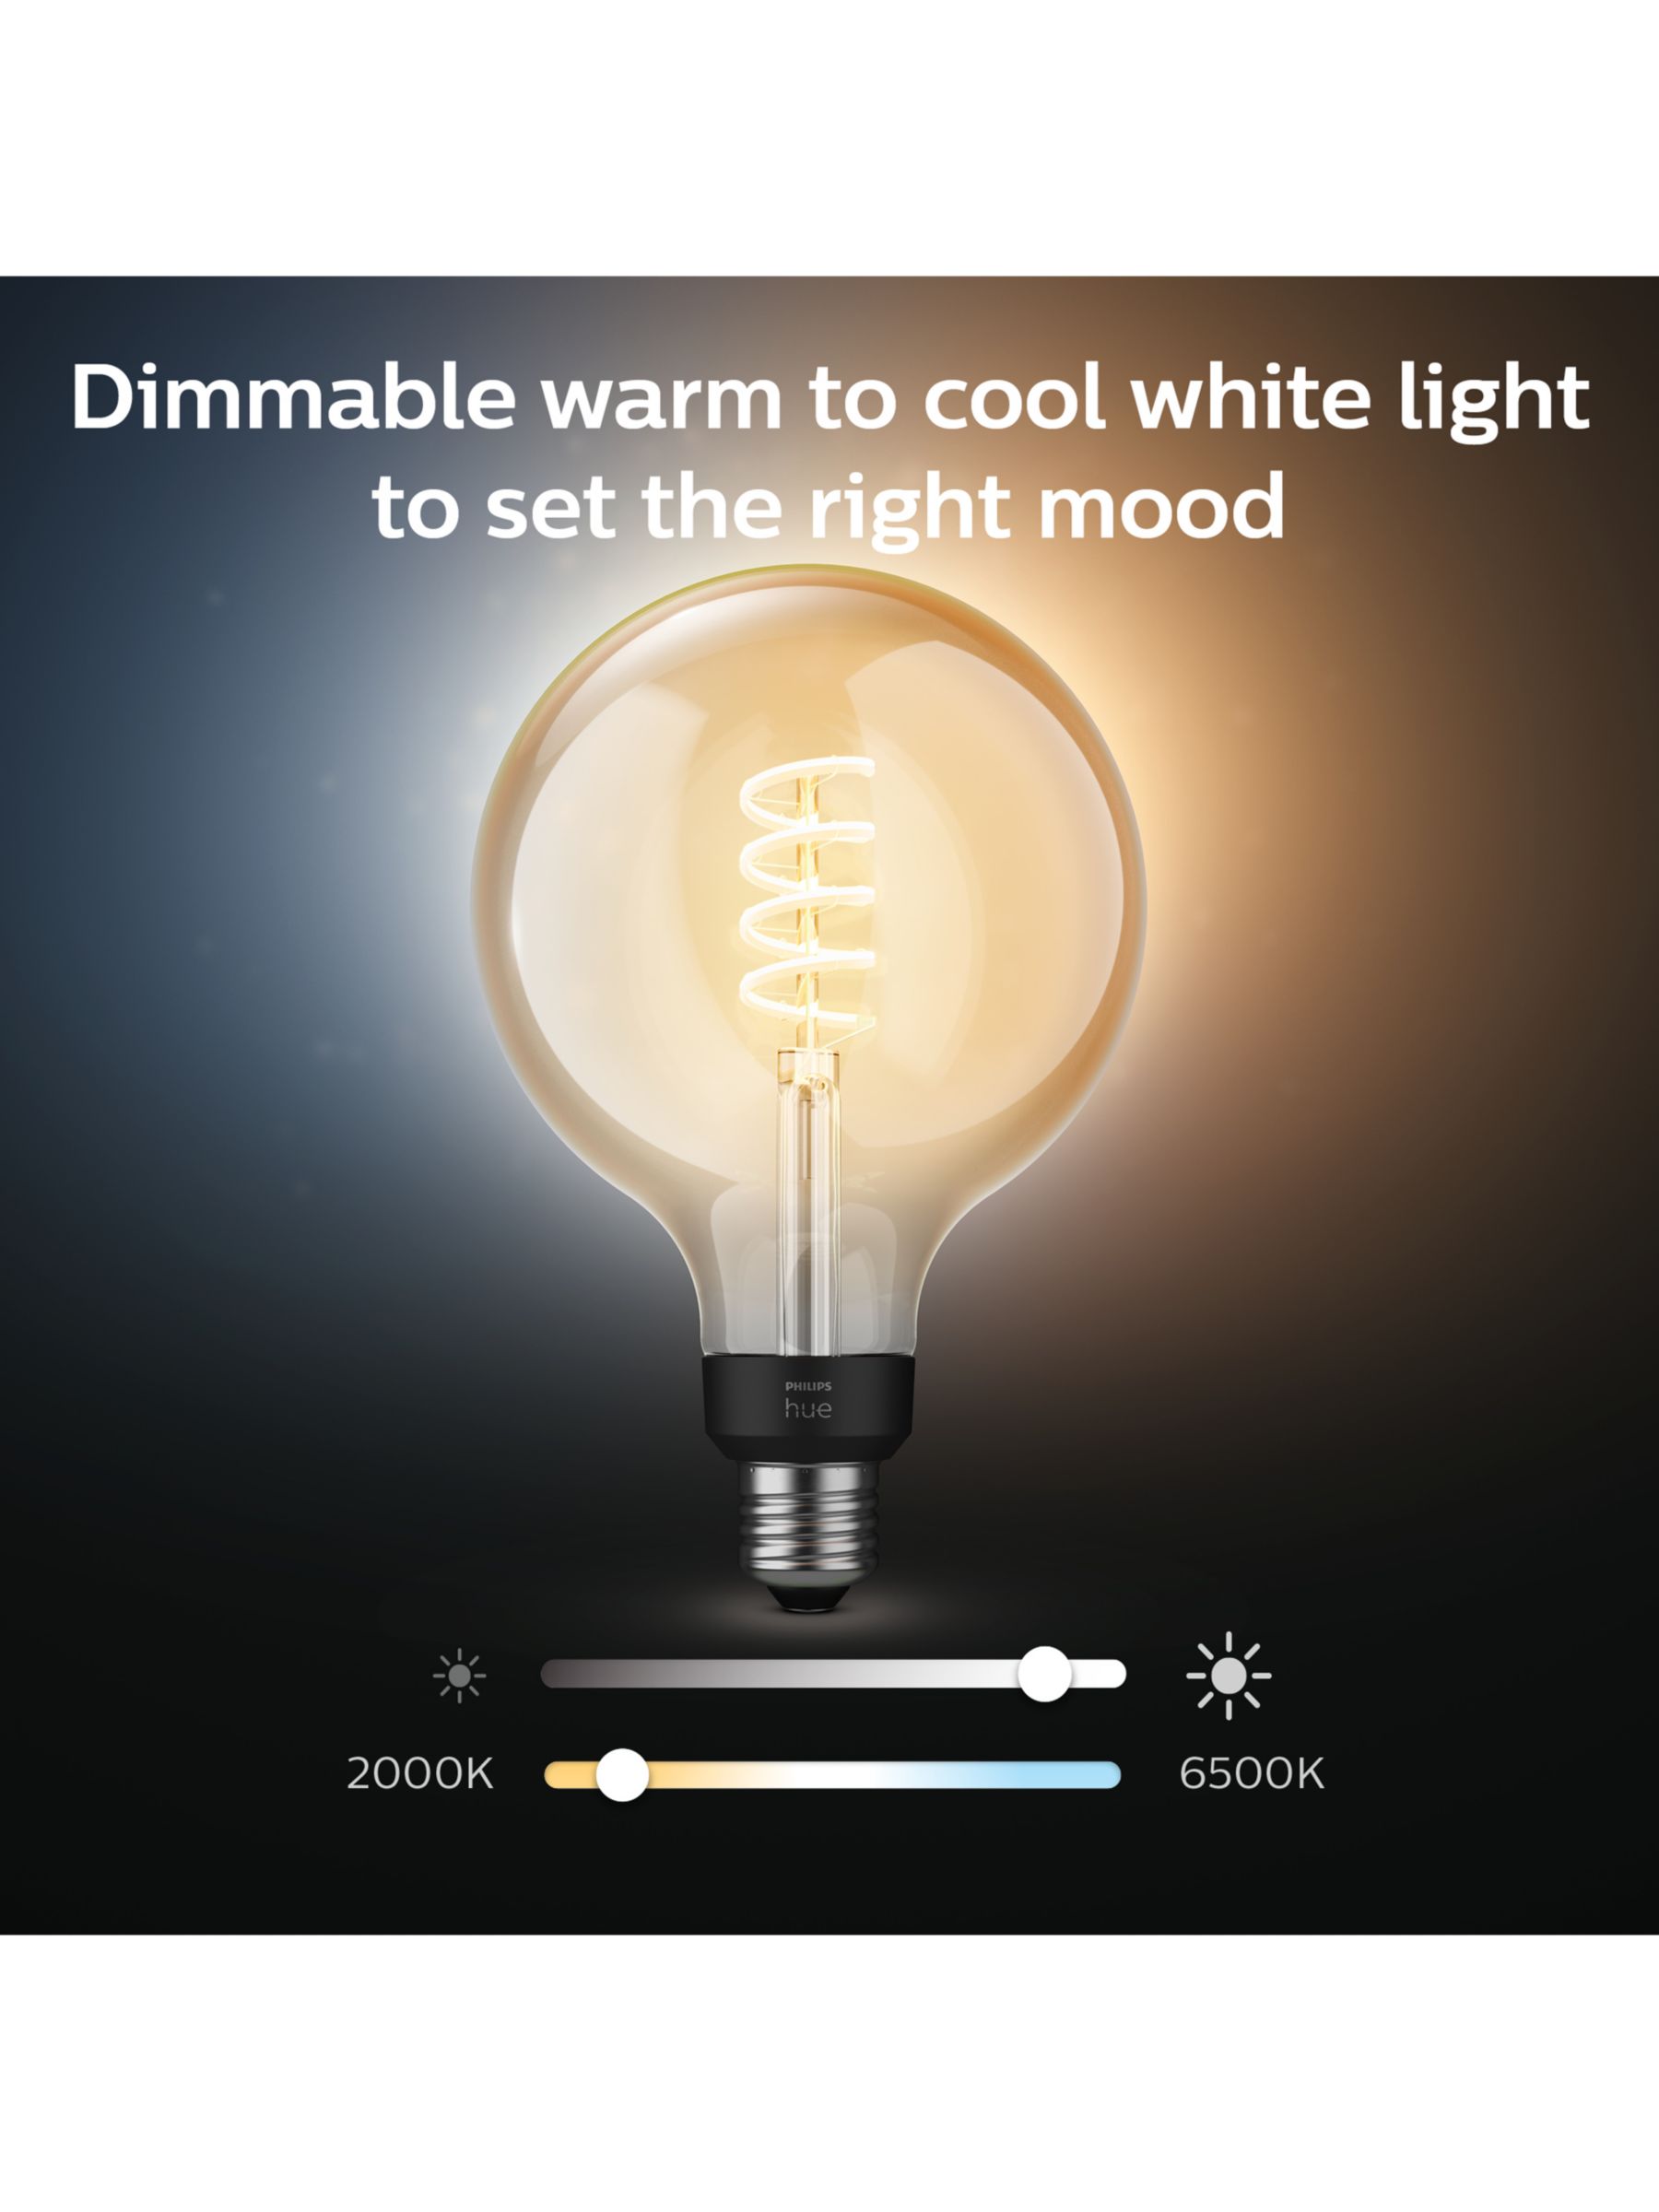 Buy Philips Hue - E27 Filament G125 - White Ambiance & Dimmer Switch -  Bundle - Free shipping